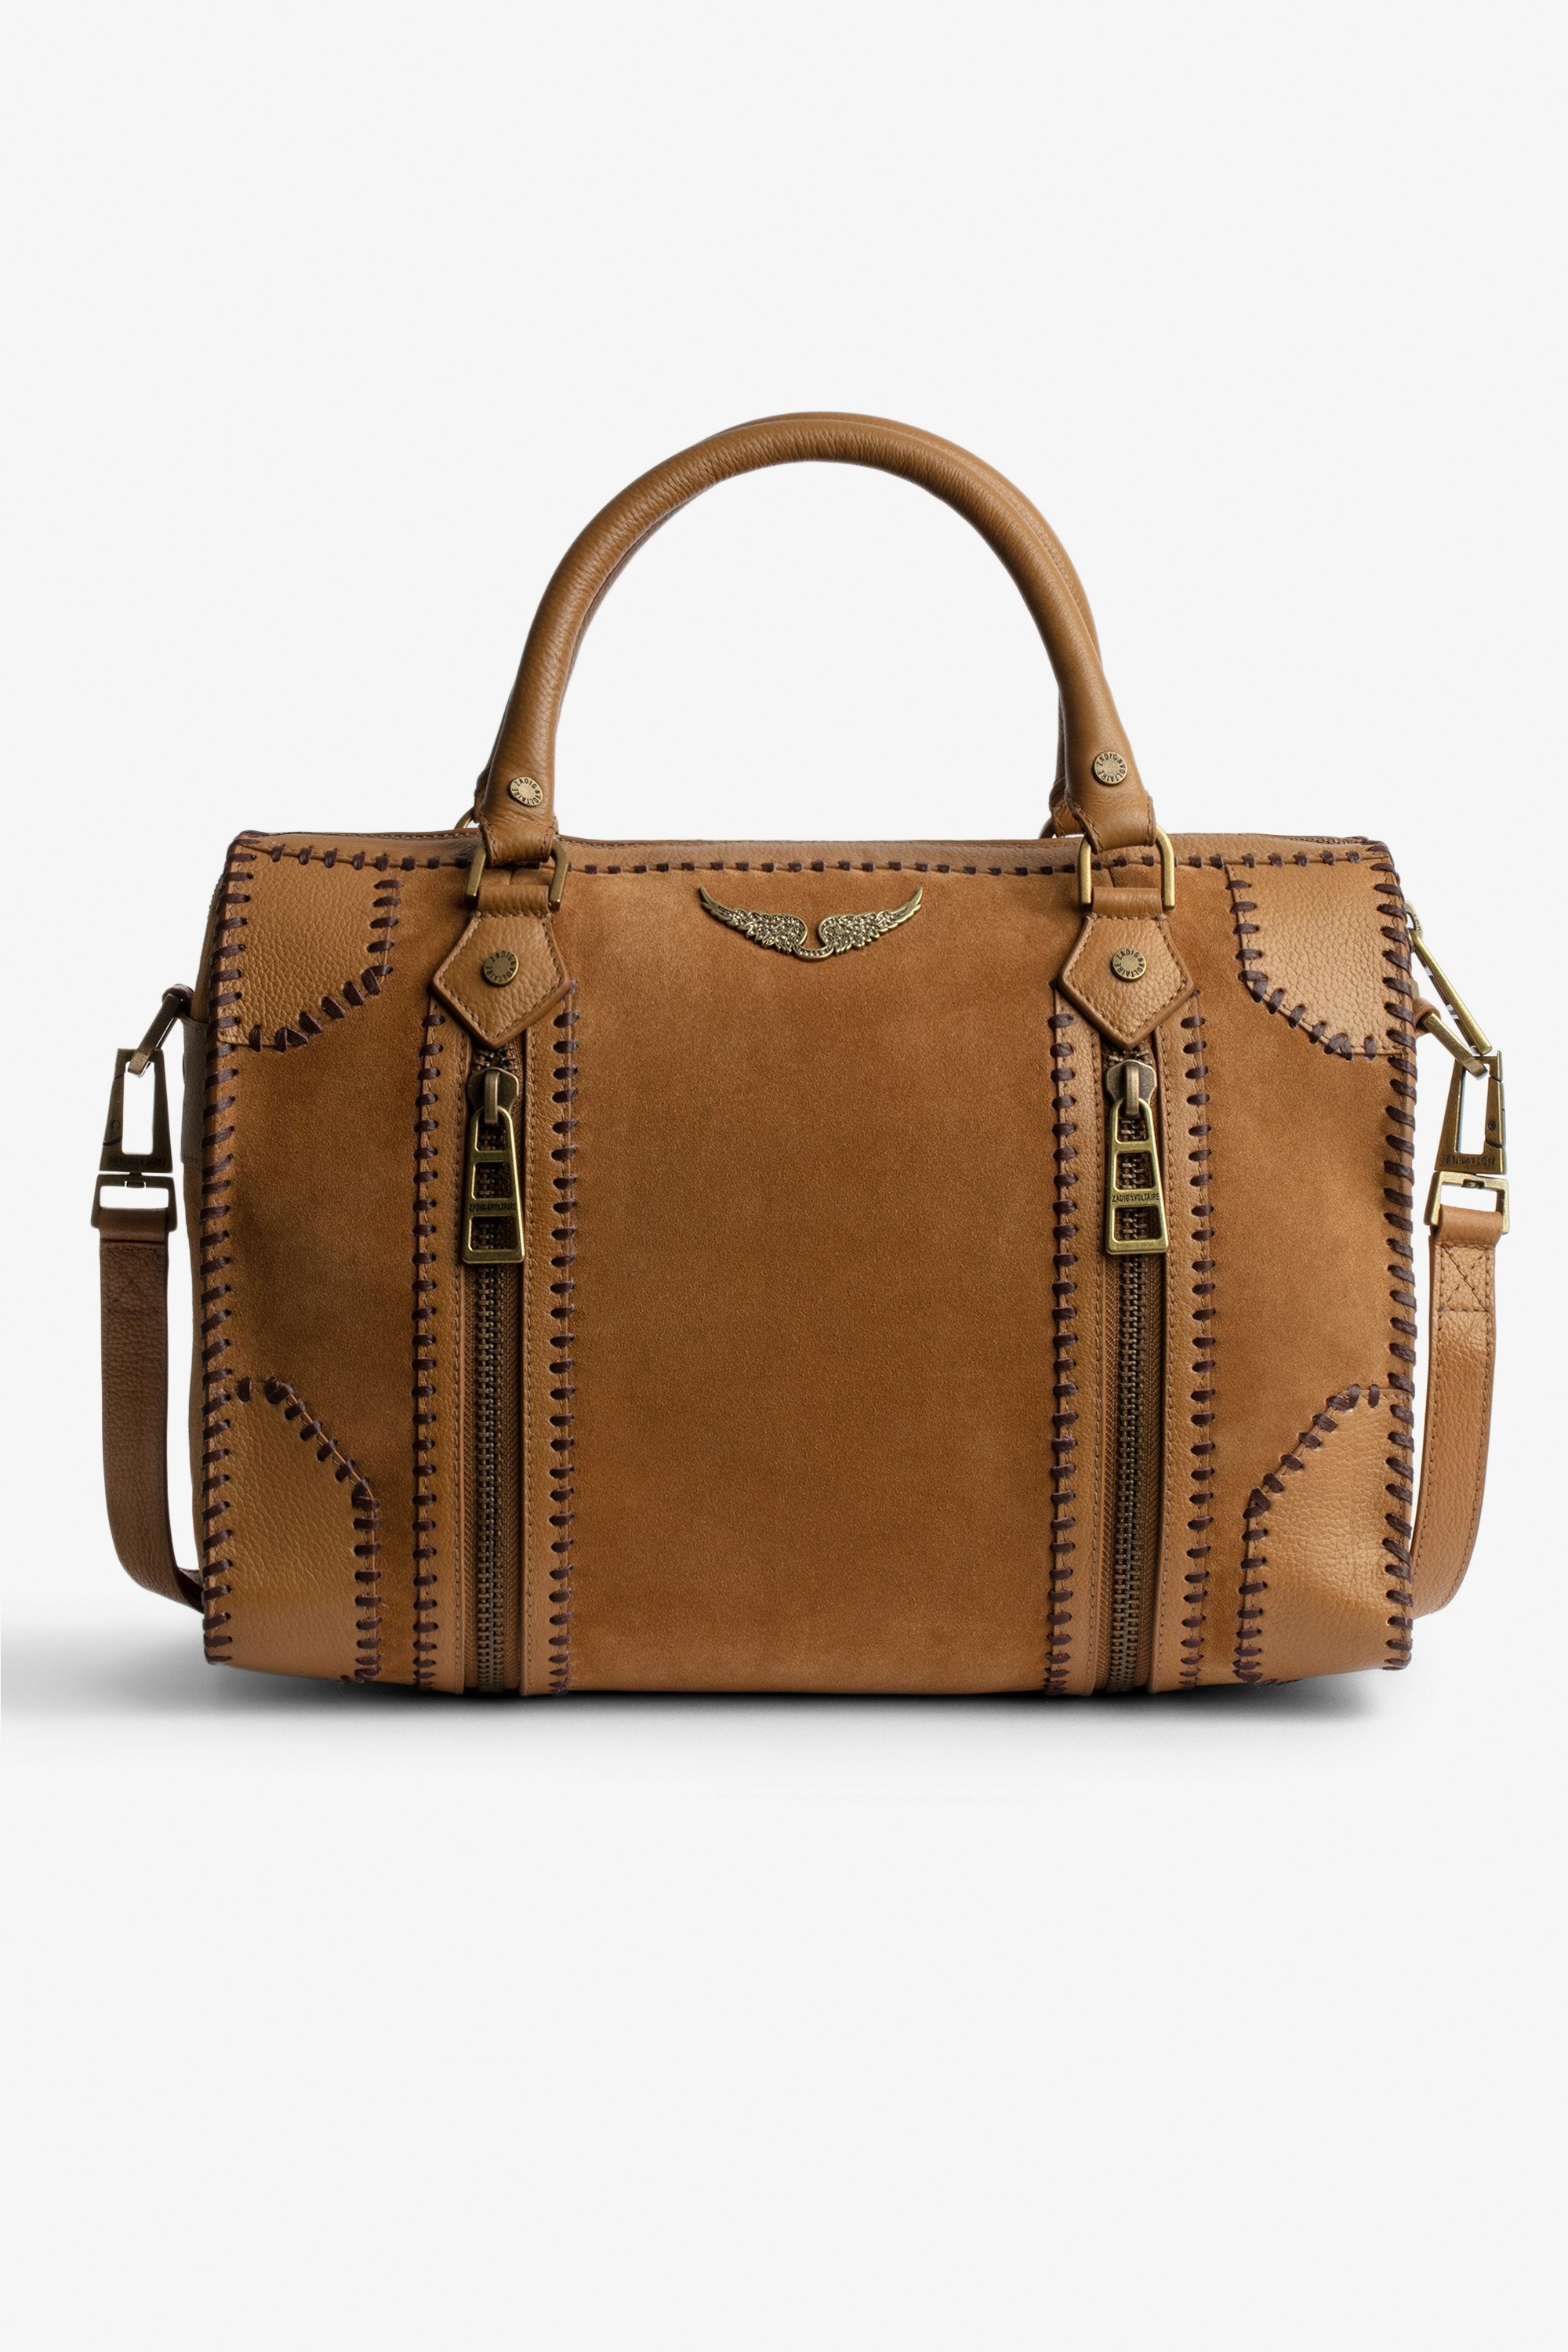 Sunny Medium #2 Bag Women's Voltaire camel suede bag with contrasting stitching and shoulder strap